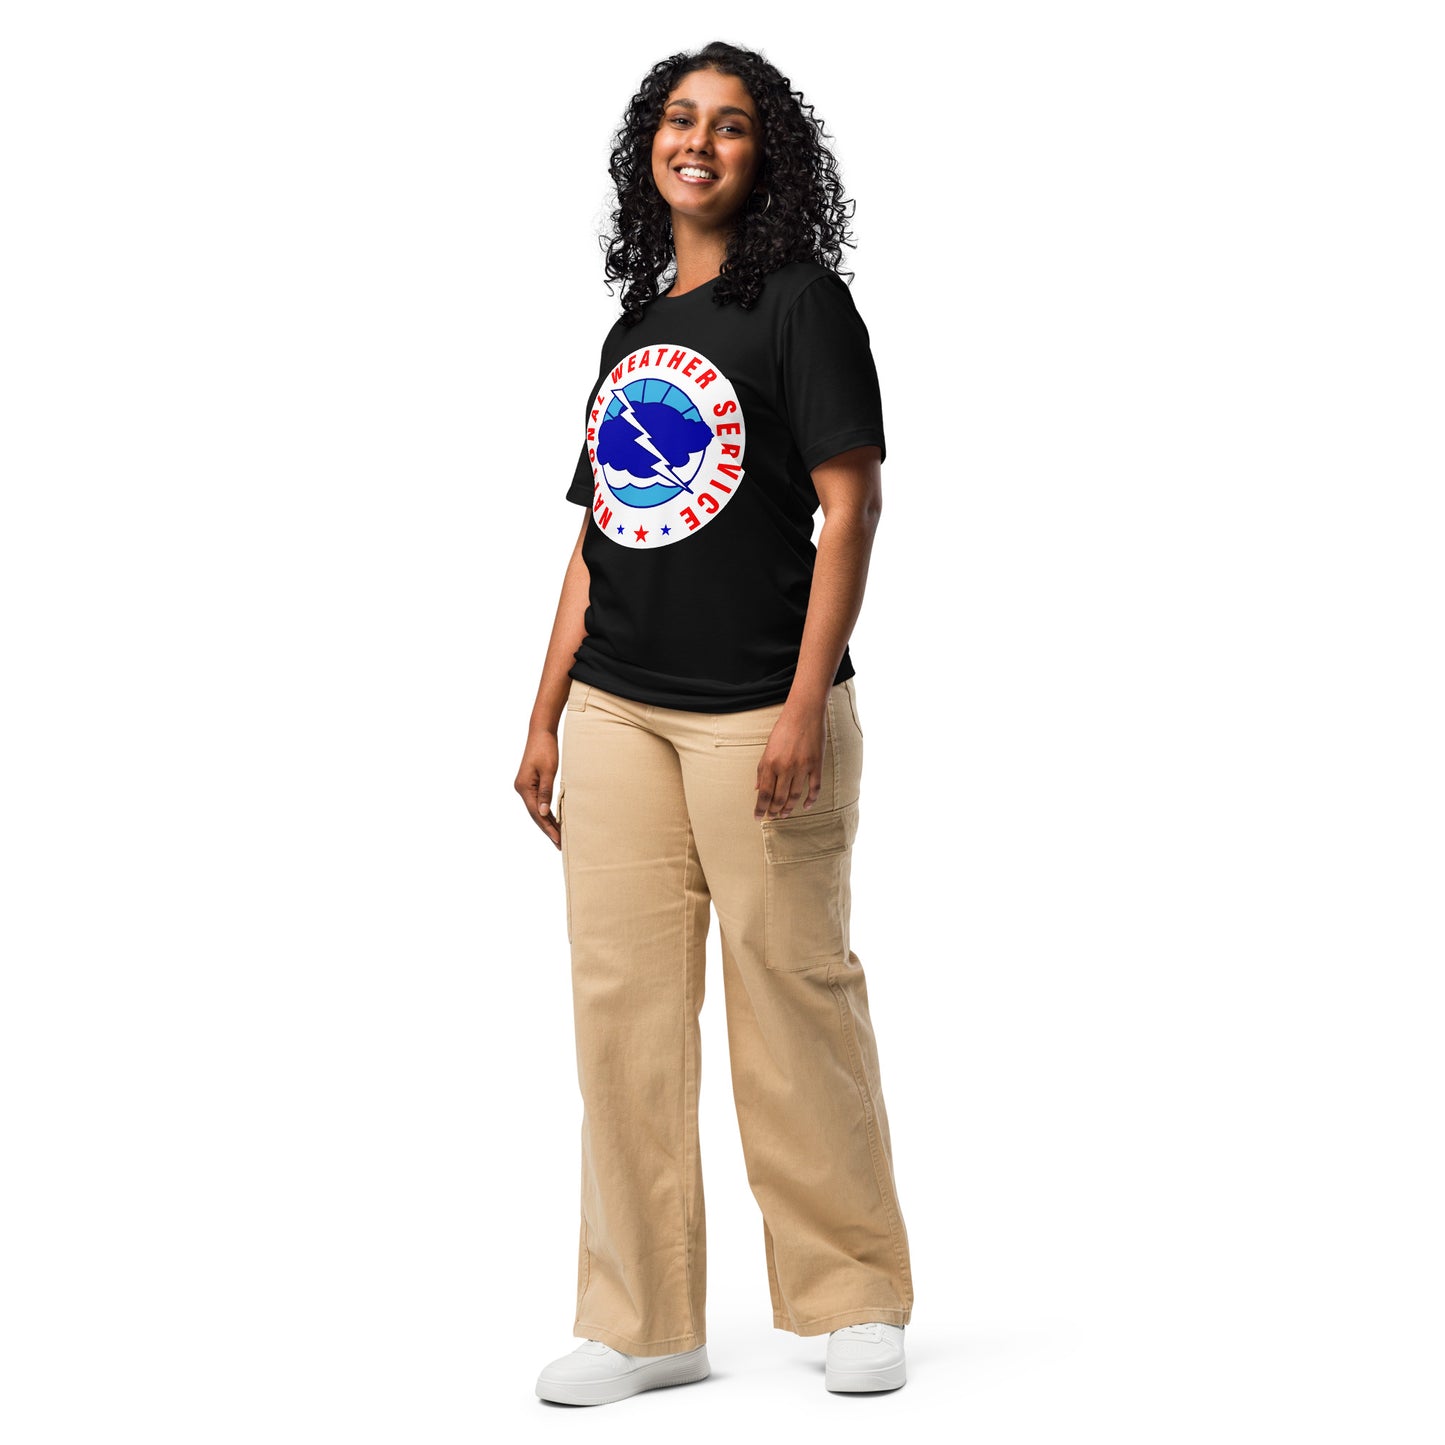 NWS Unisex t-shirt - Made in the USA!